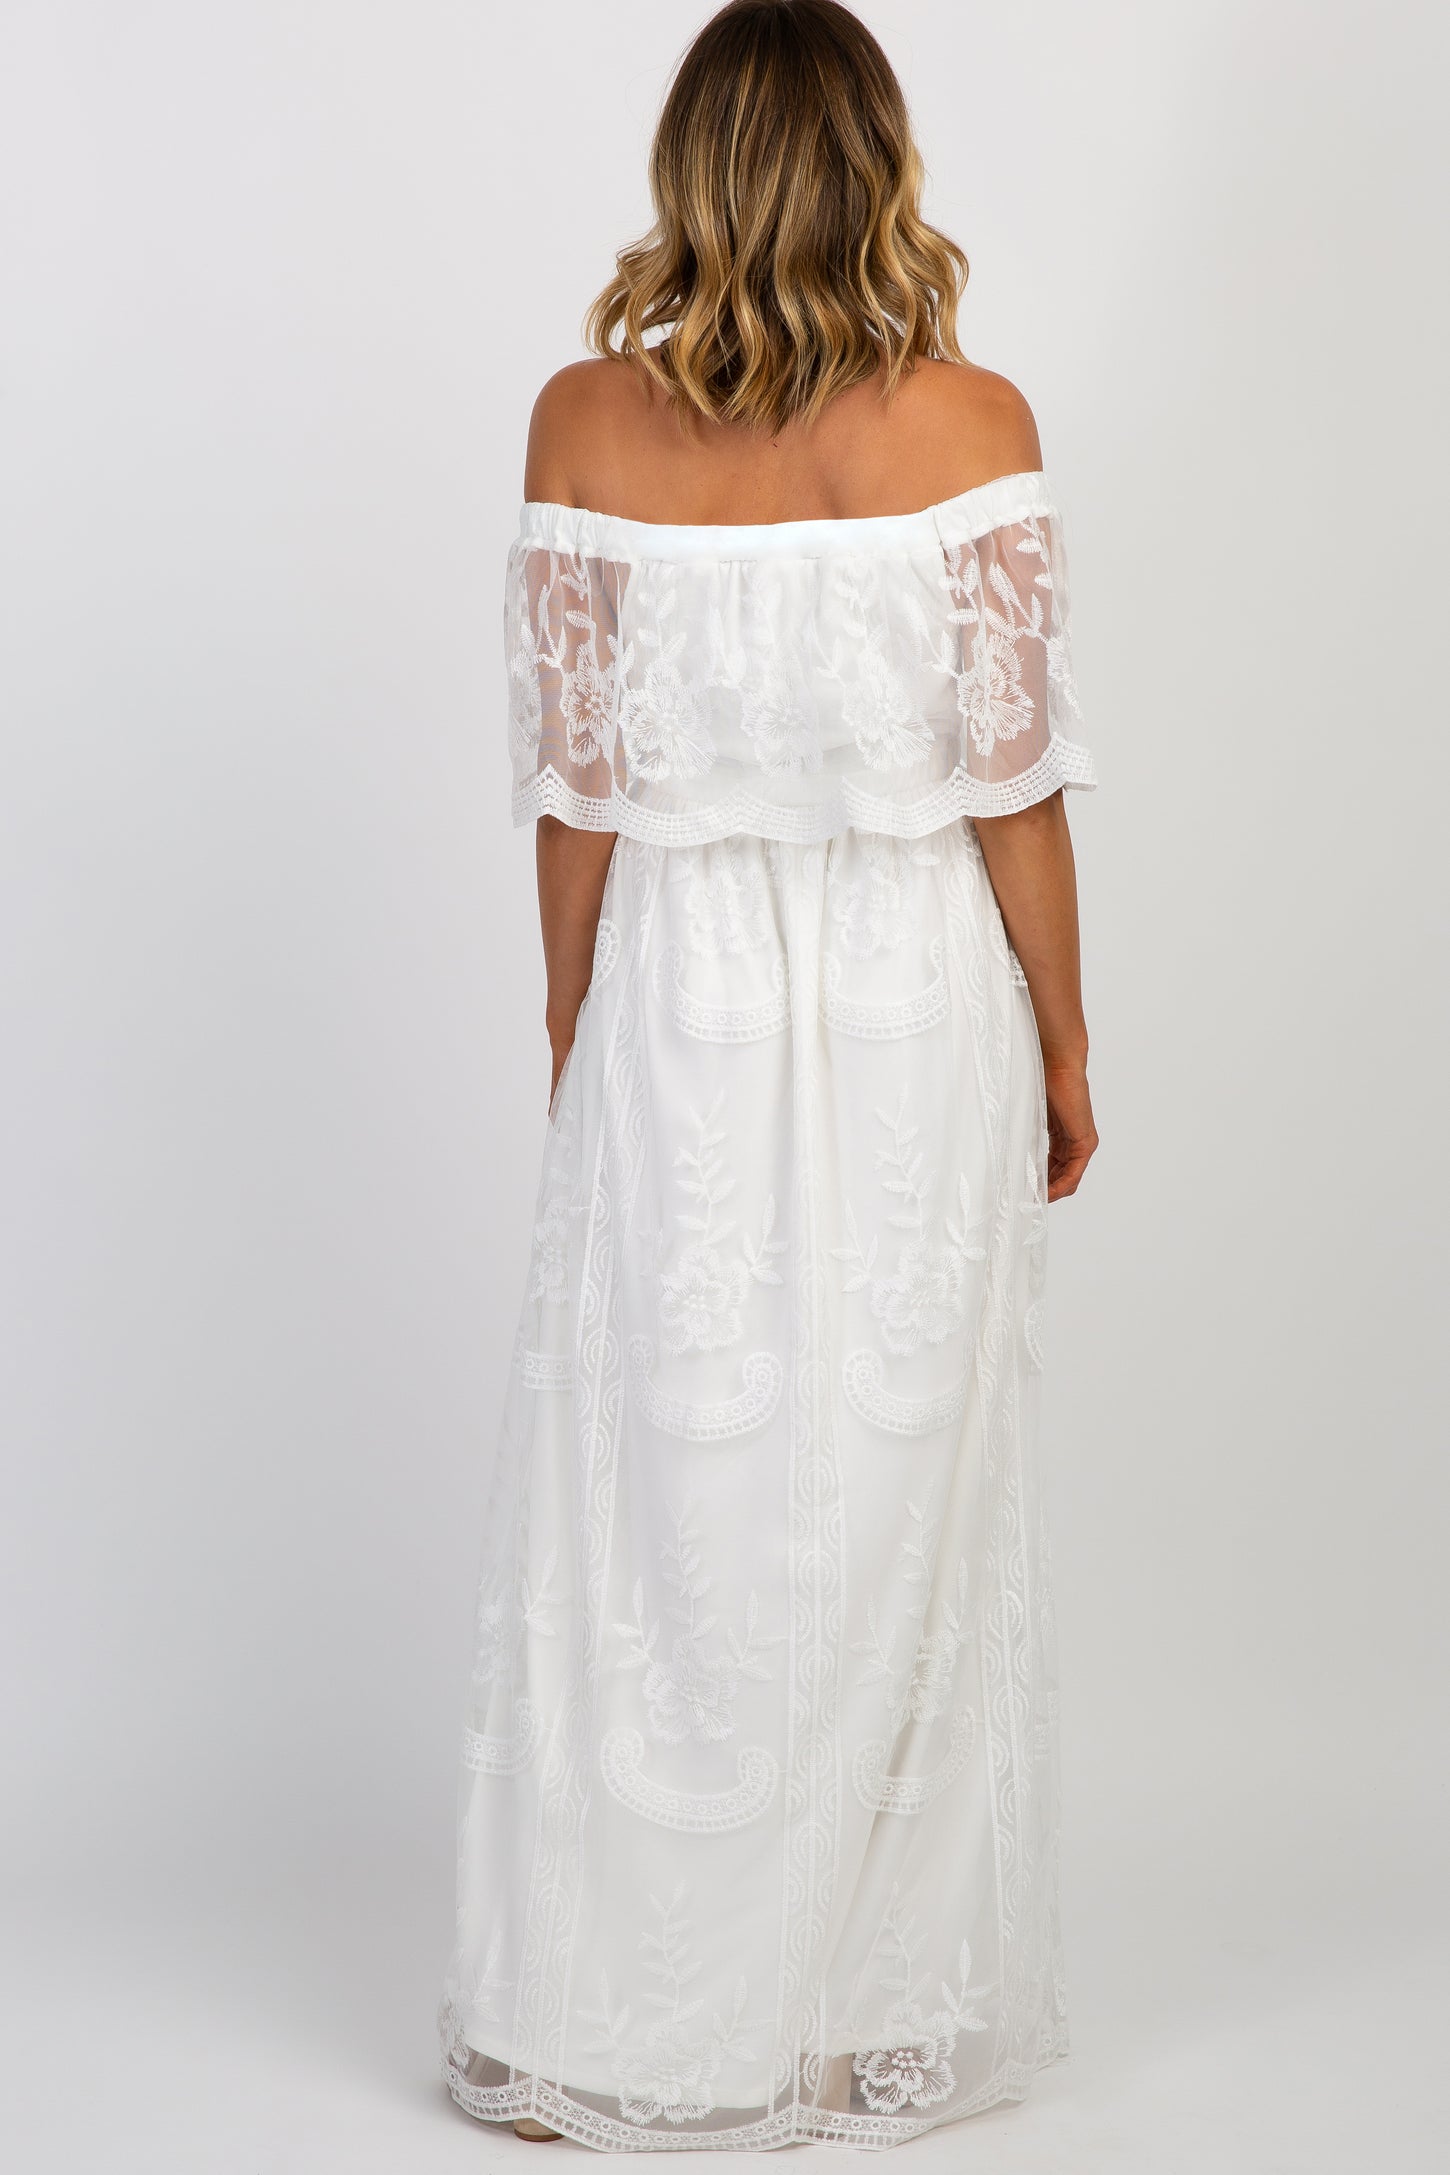 White Lace Mesh Overlay Off Shoulder Maxi Dress